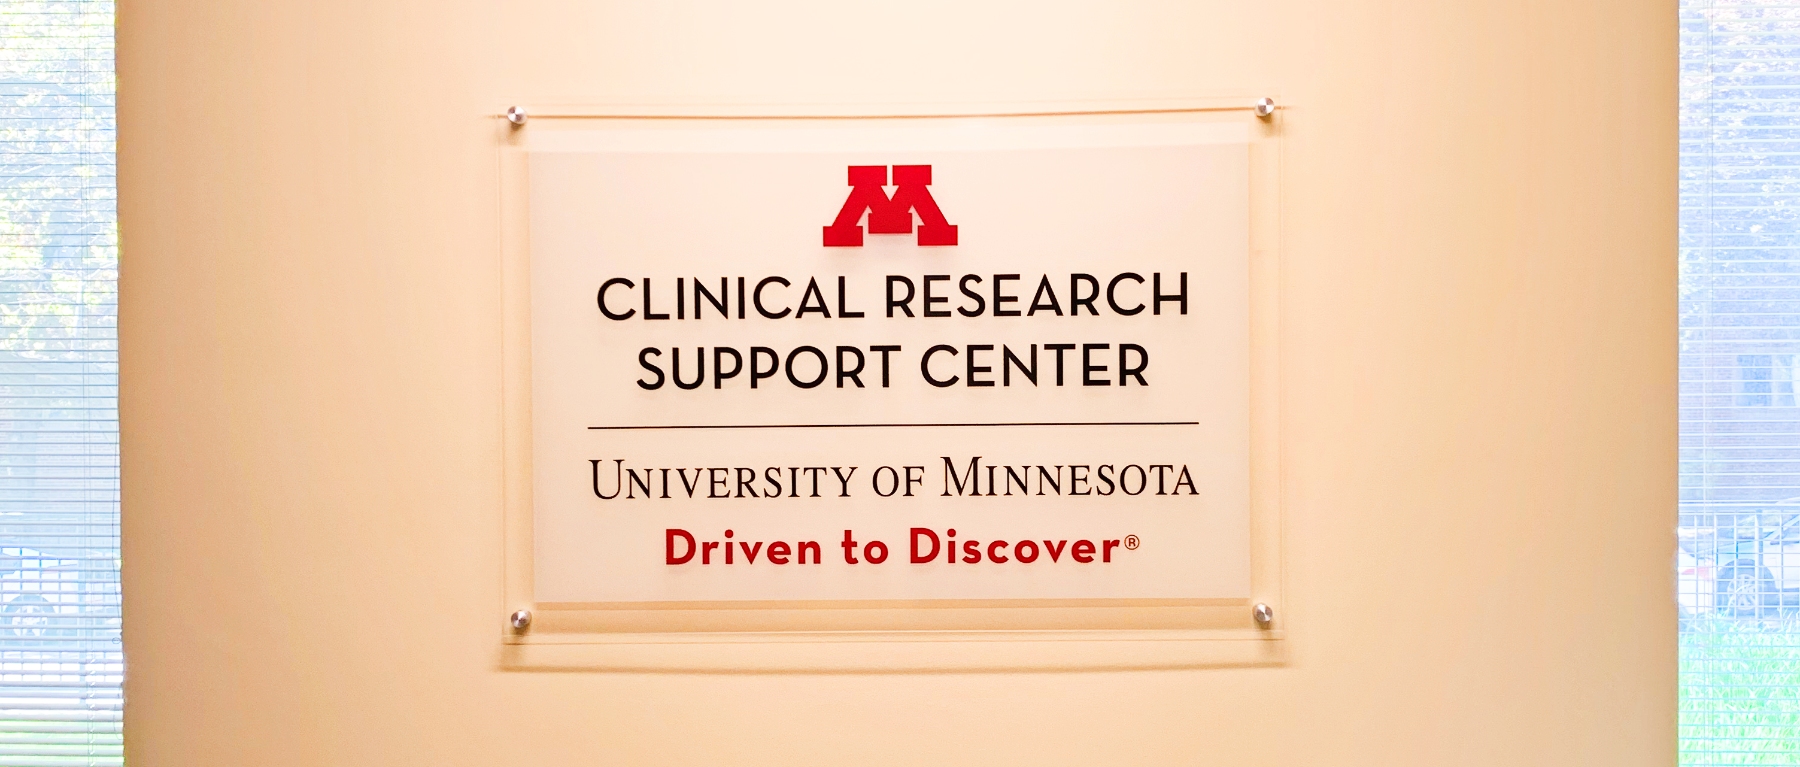 Sign that says "Clinical Research Support Center - University of Minnesota - Driven to Discover"